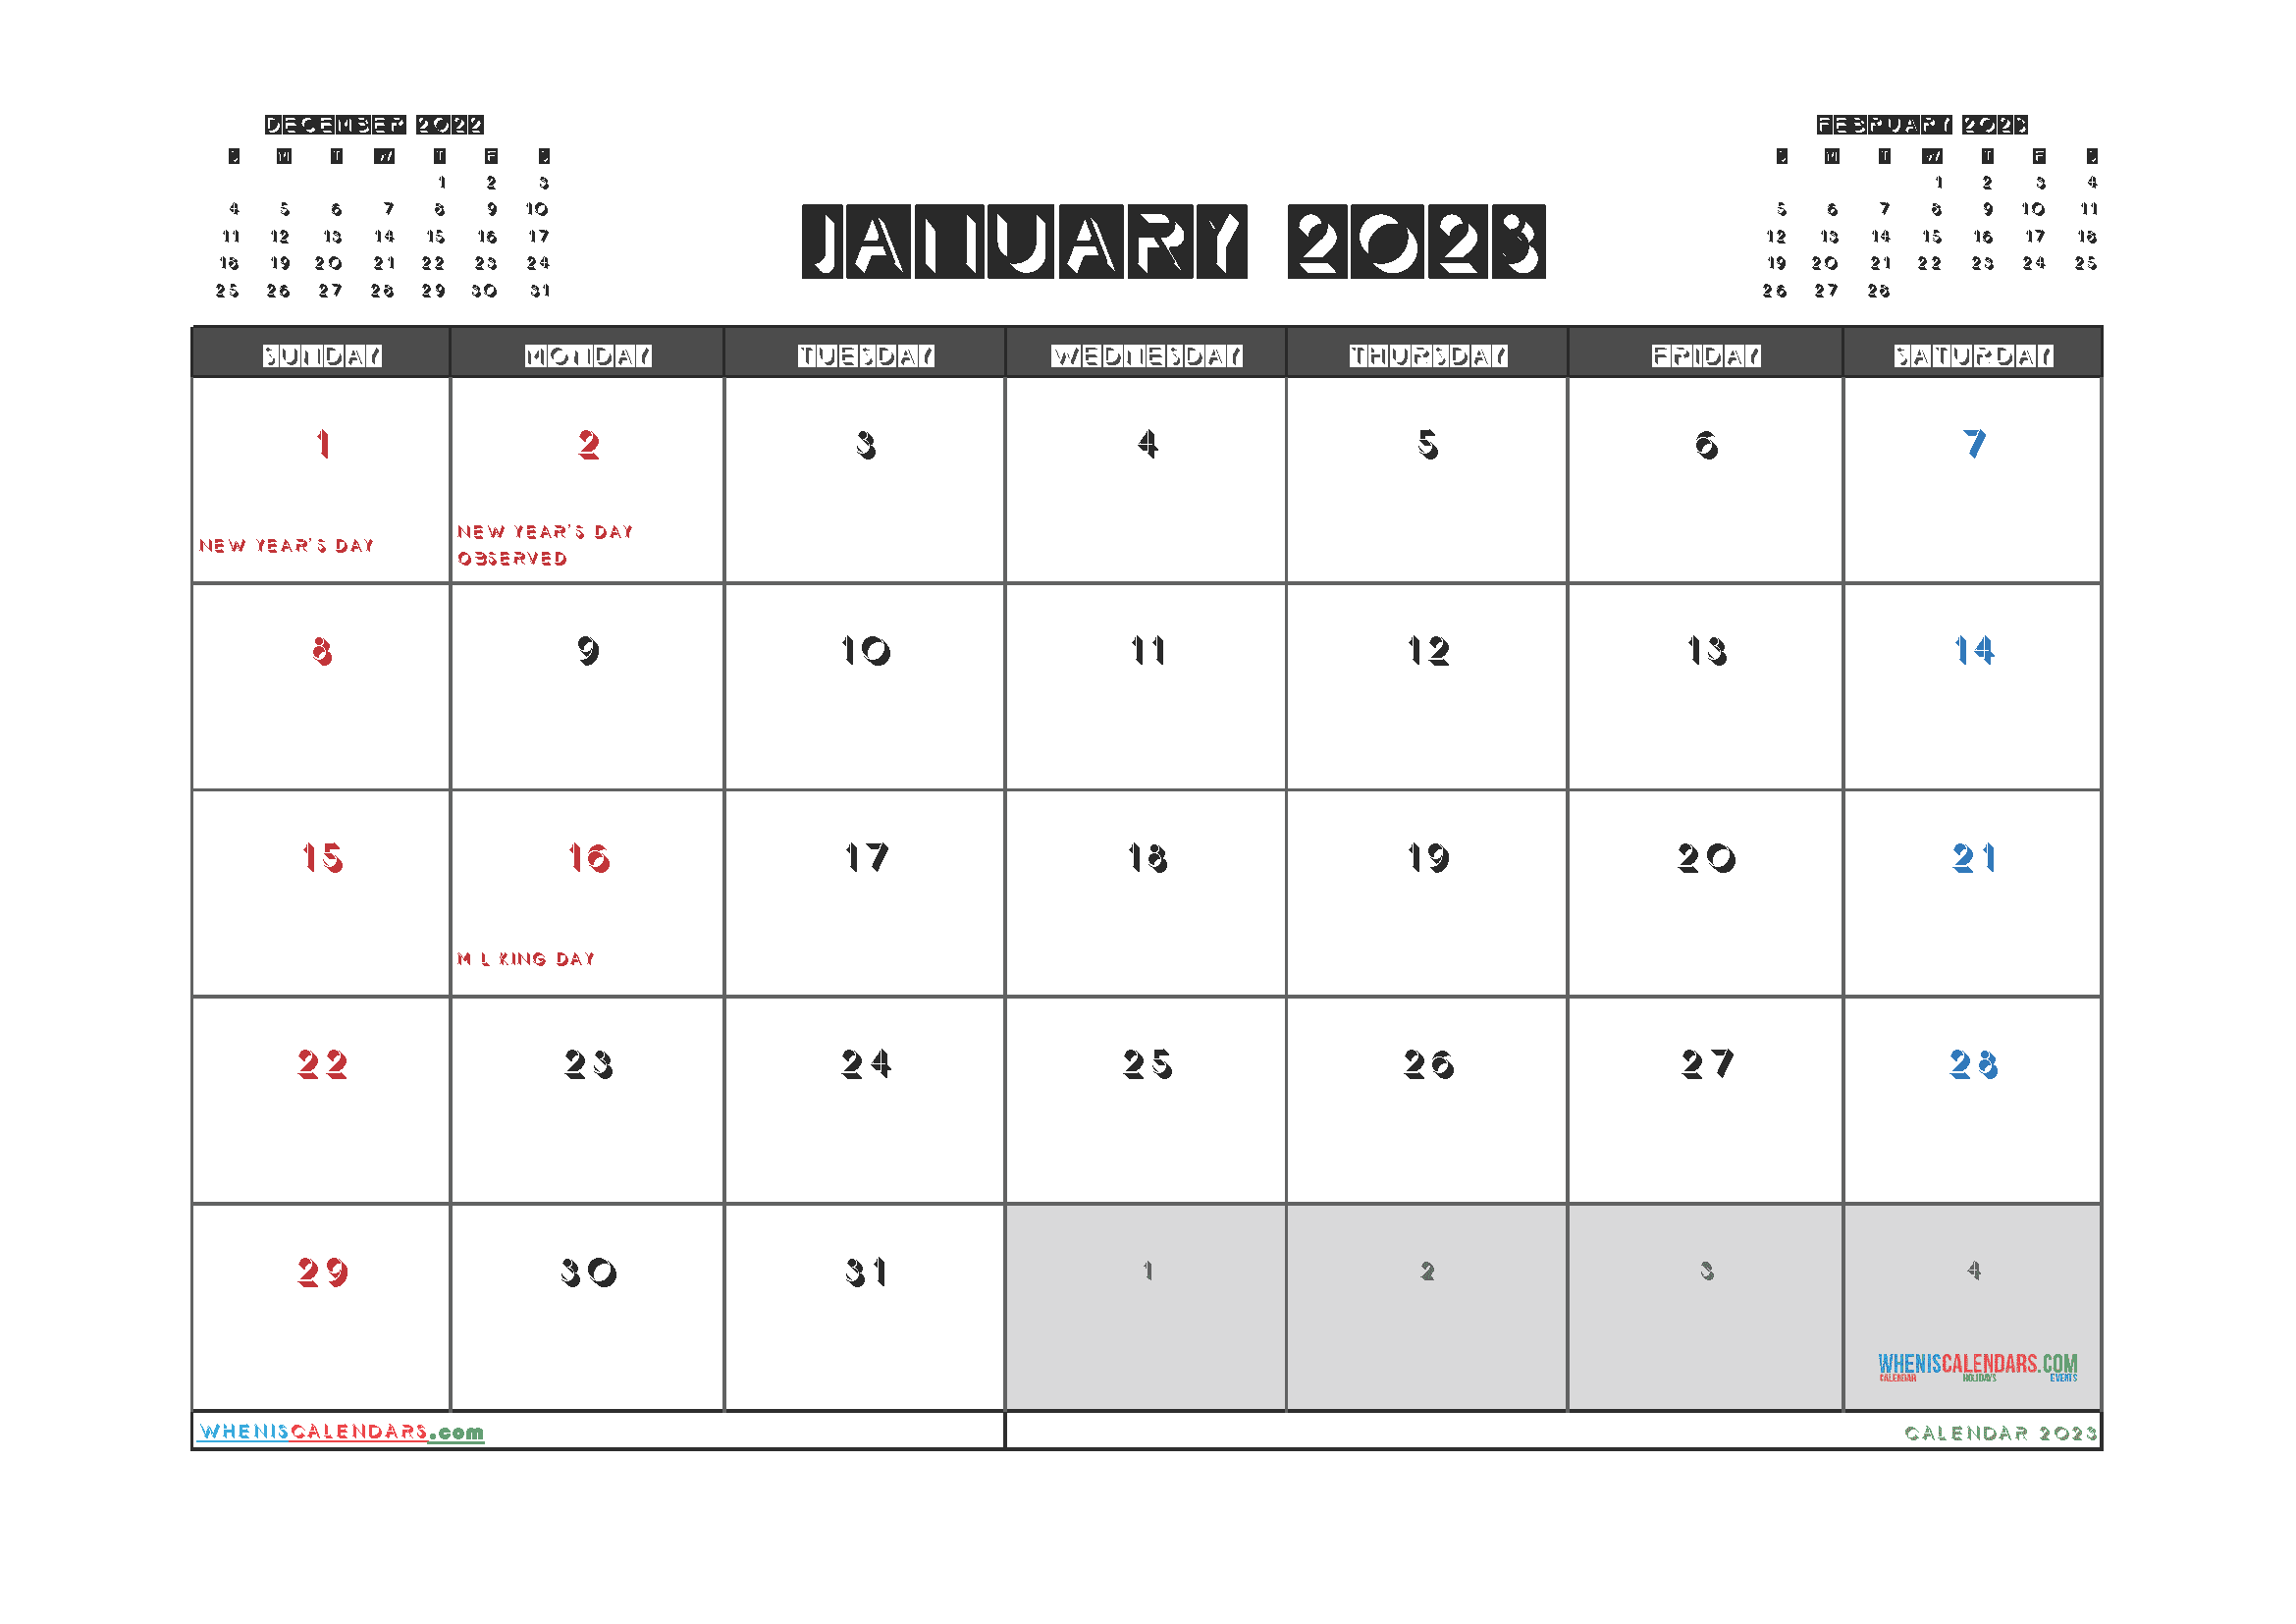 Free Calendar 2023 January with Holidays PDF in Landscape